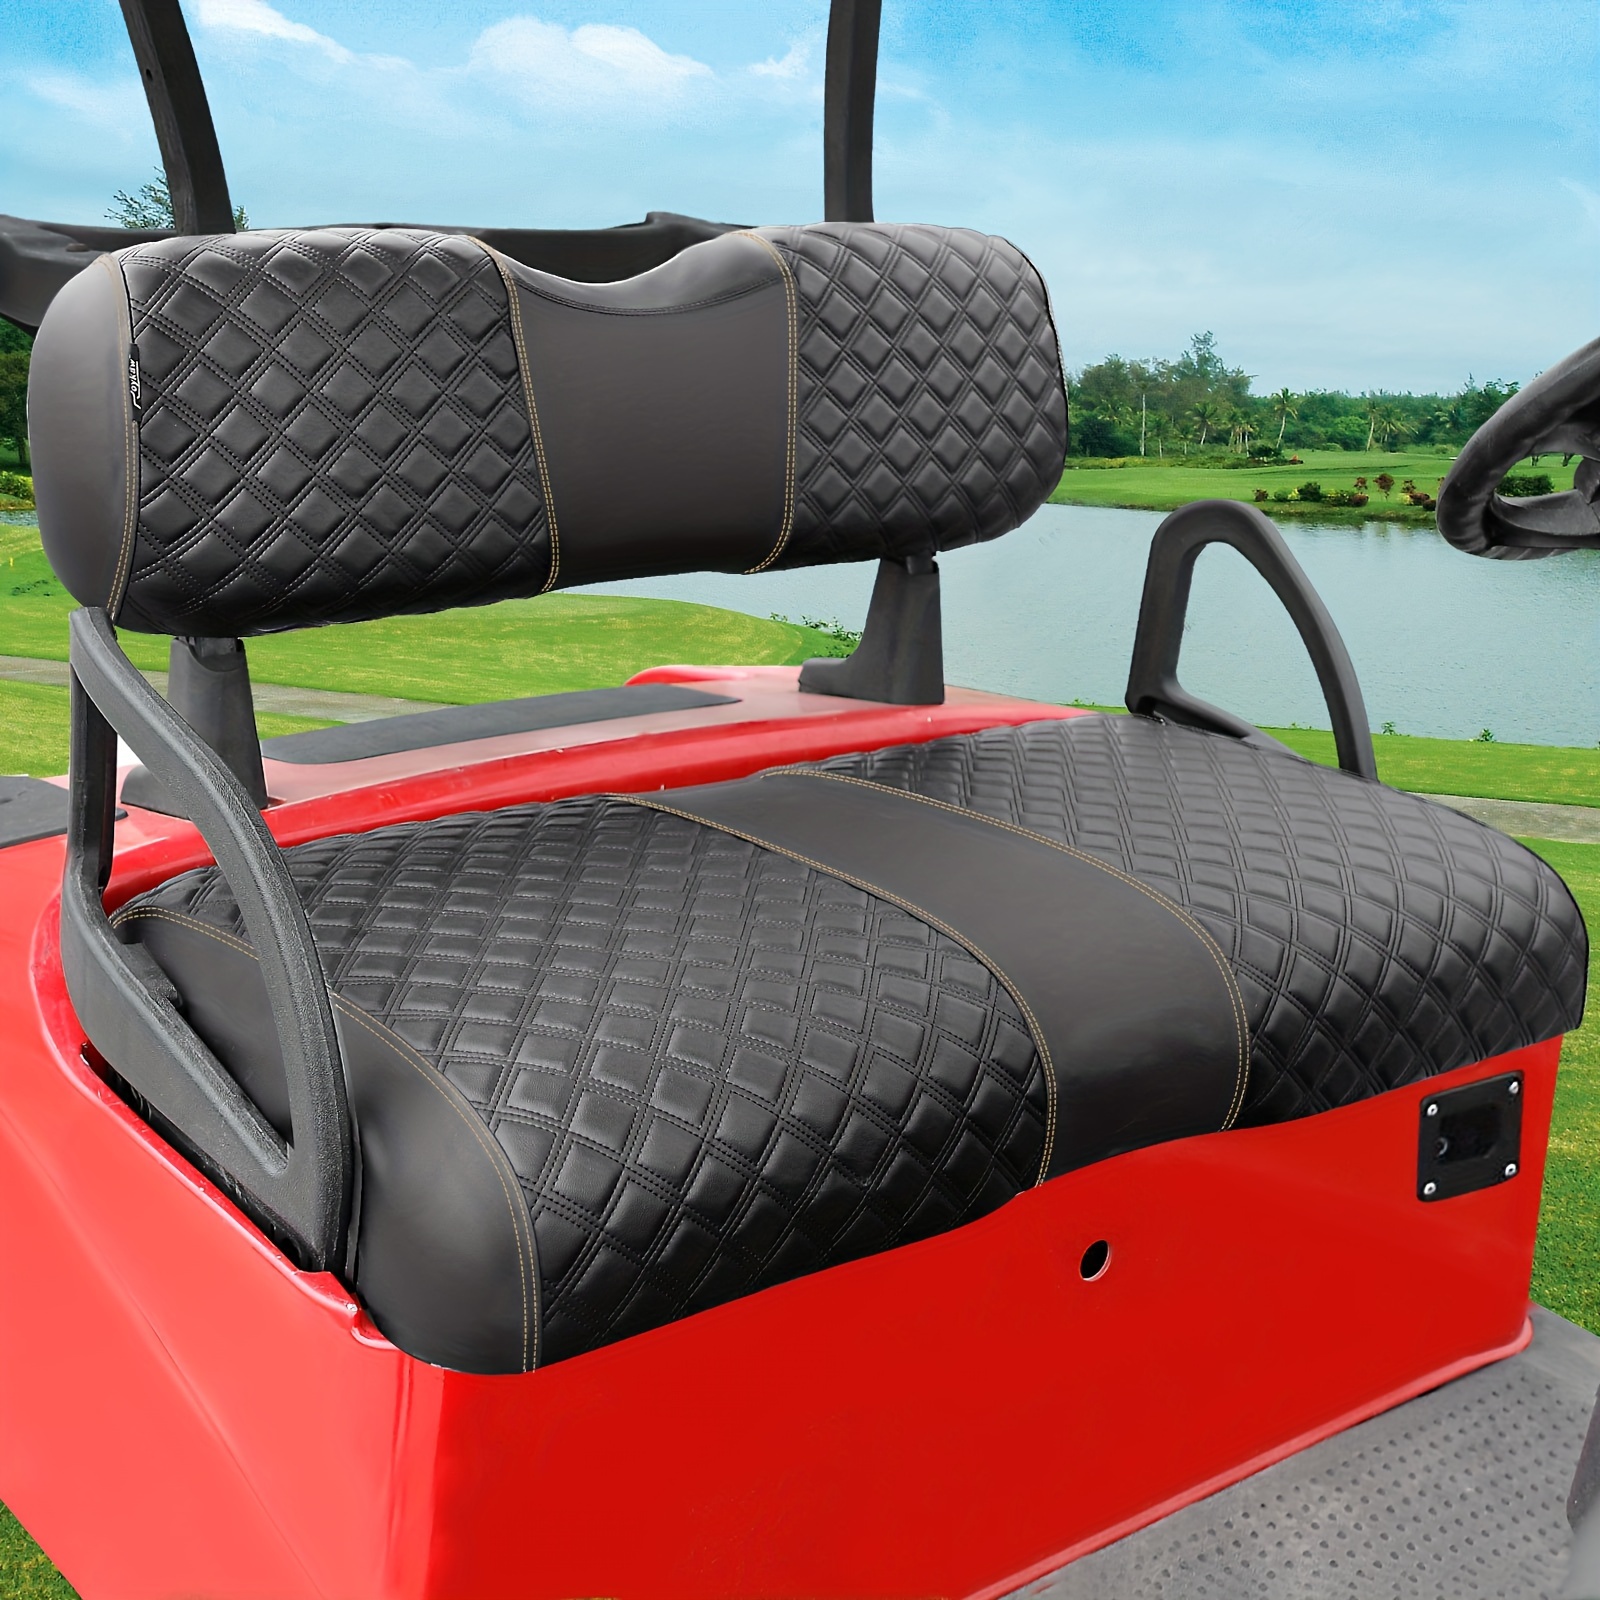 

Roykaw Golf Cart Premium Seat Covers Kit Fit For Ezgo Rxv Oem Ordinary Front Seat Cushion, Marine Grade Vinyl Material/more Sturdy And Comfortable, Breathable & Easy To Clean, Well Made Quality